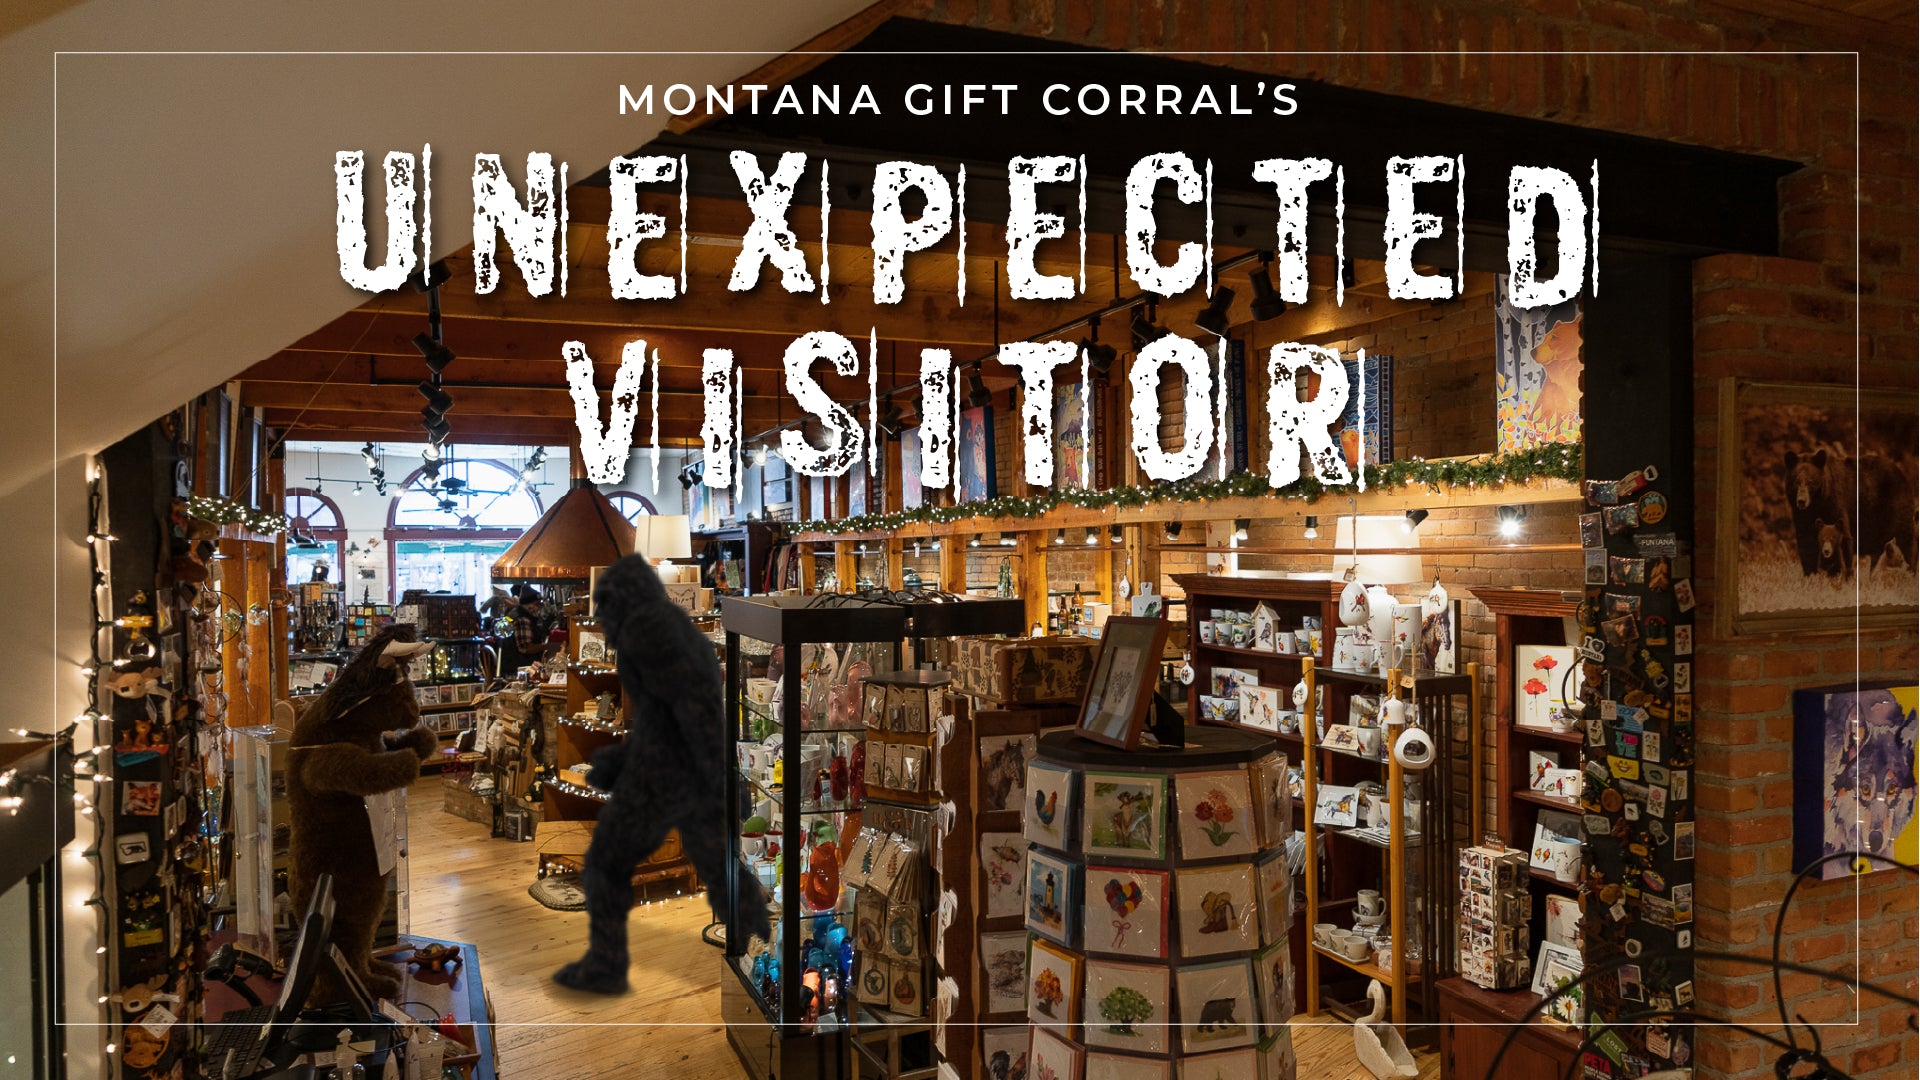 A few of our Montana Gift Corral employees have been mentioning that there have been some unexplained disturbances and missing products that are completely unaccounted for.